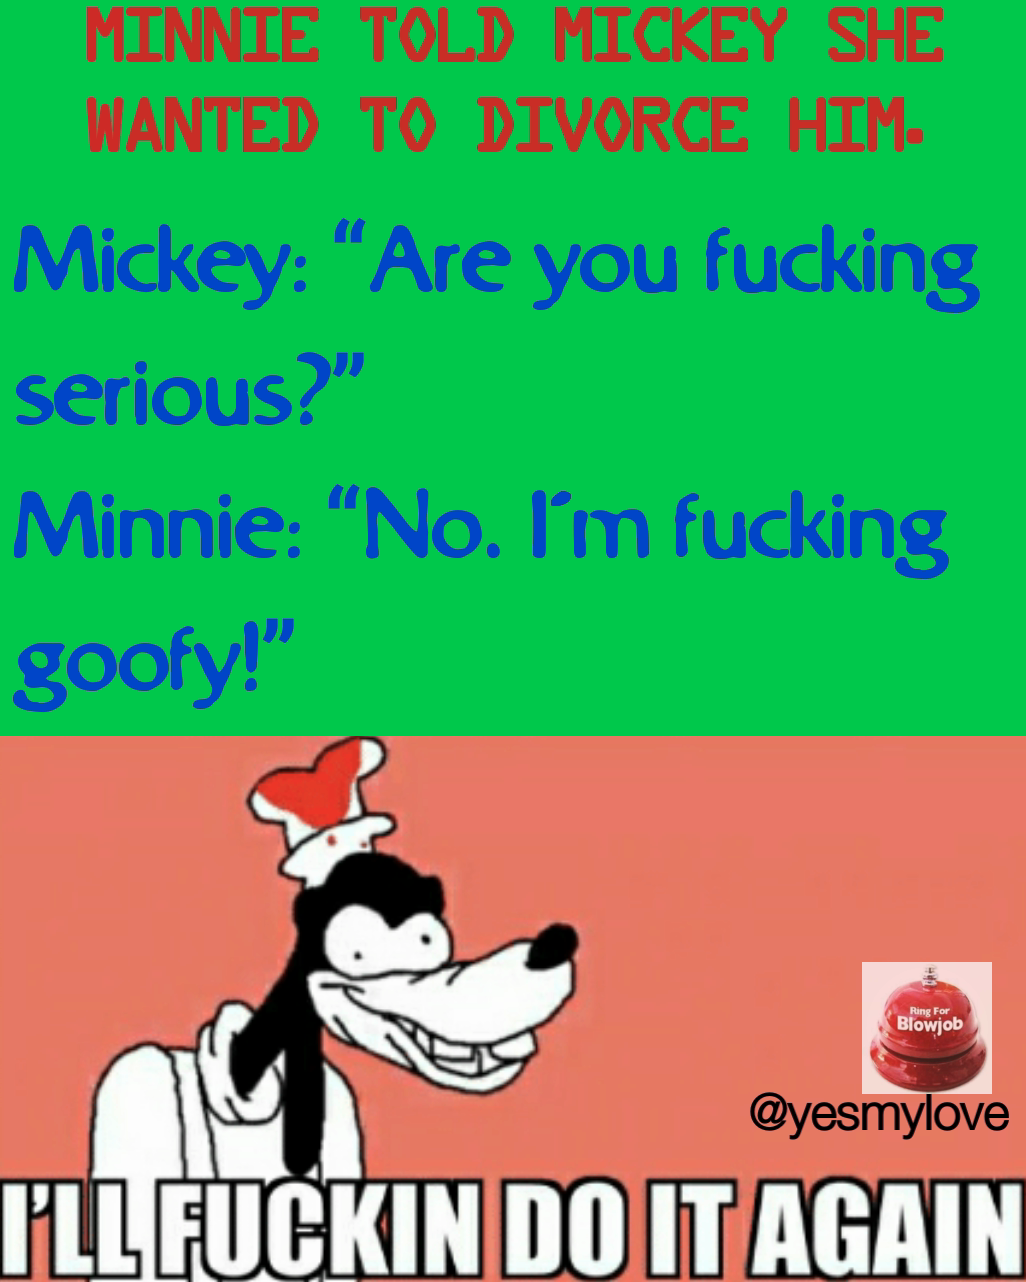 Mickey: “Are you fucking serious?”
Minnie: “No. I’m fucking goofy!”

 @yesmylove Type Text Minnie told Mickey she wanted to divorce him.

